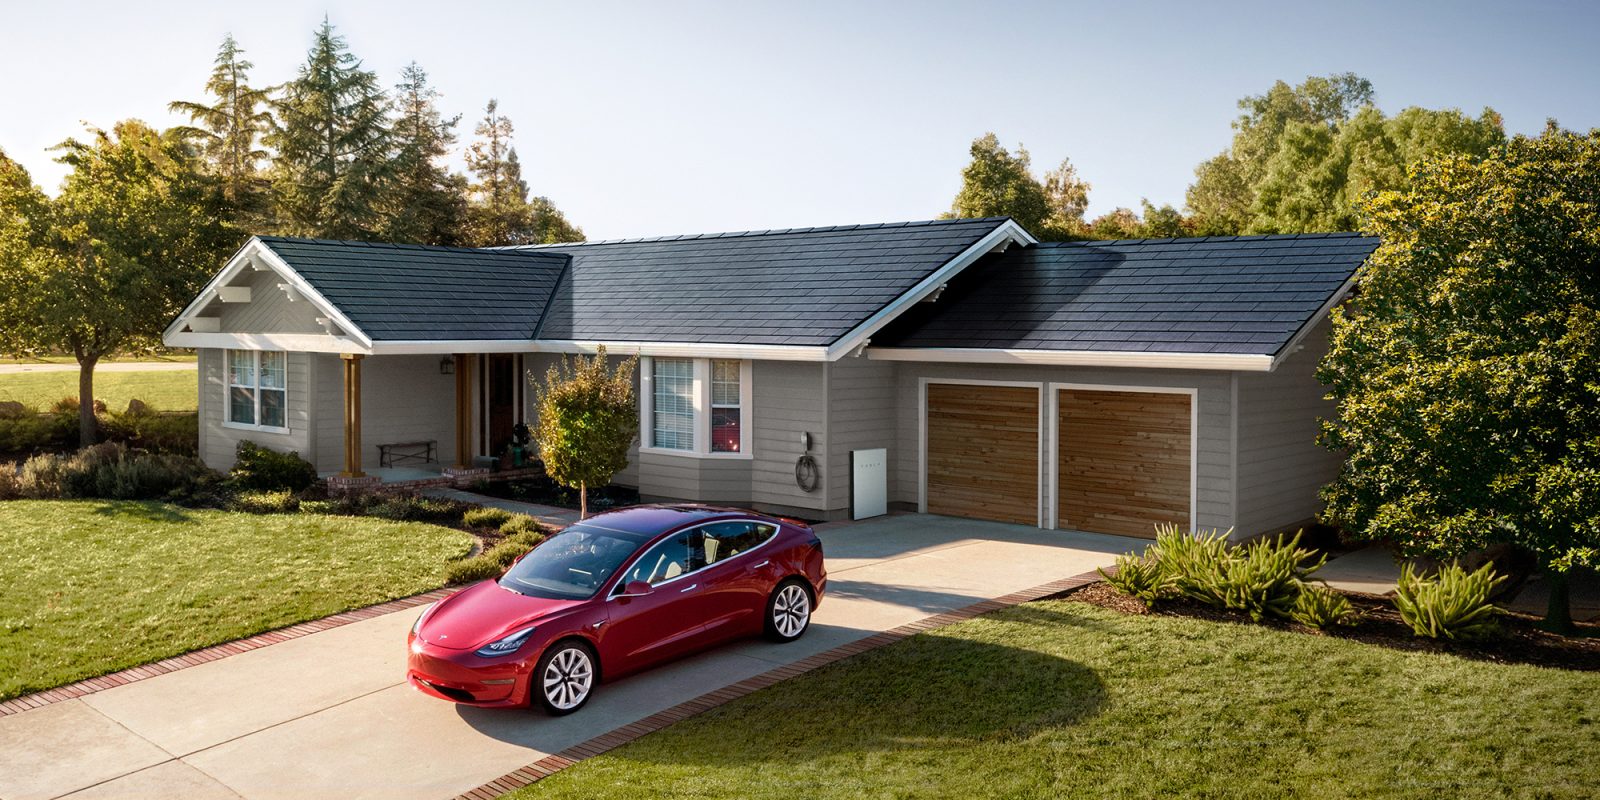 “Green Energy Is The Future” Tesla Just LAUNCHED A Virtual Power Plant